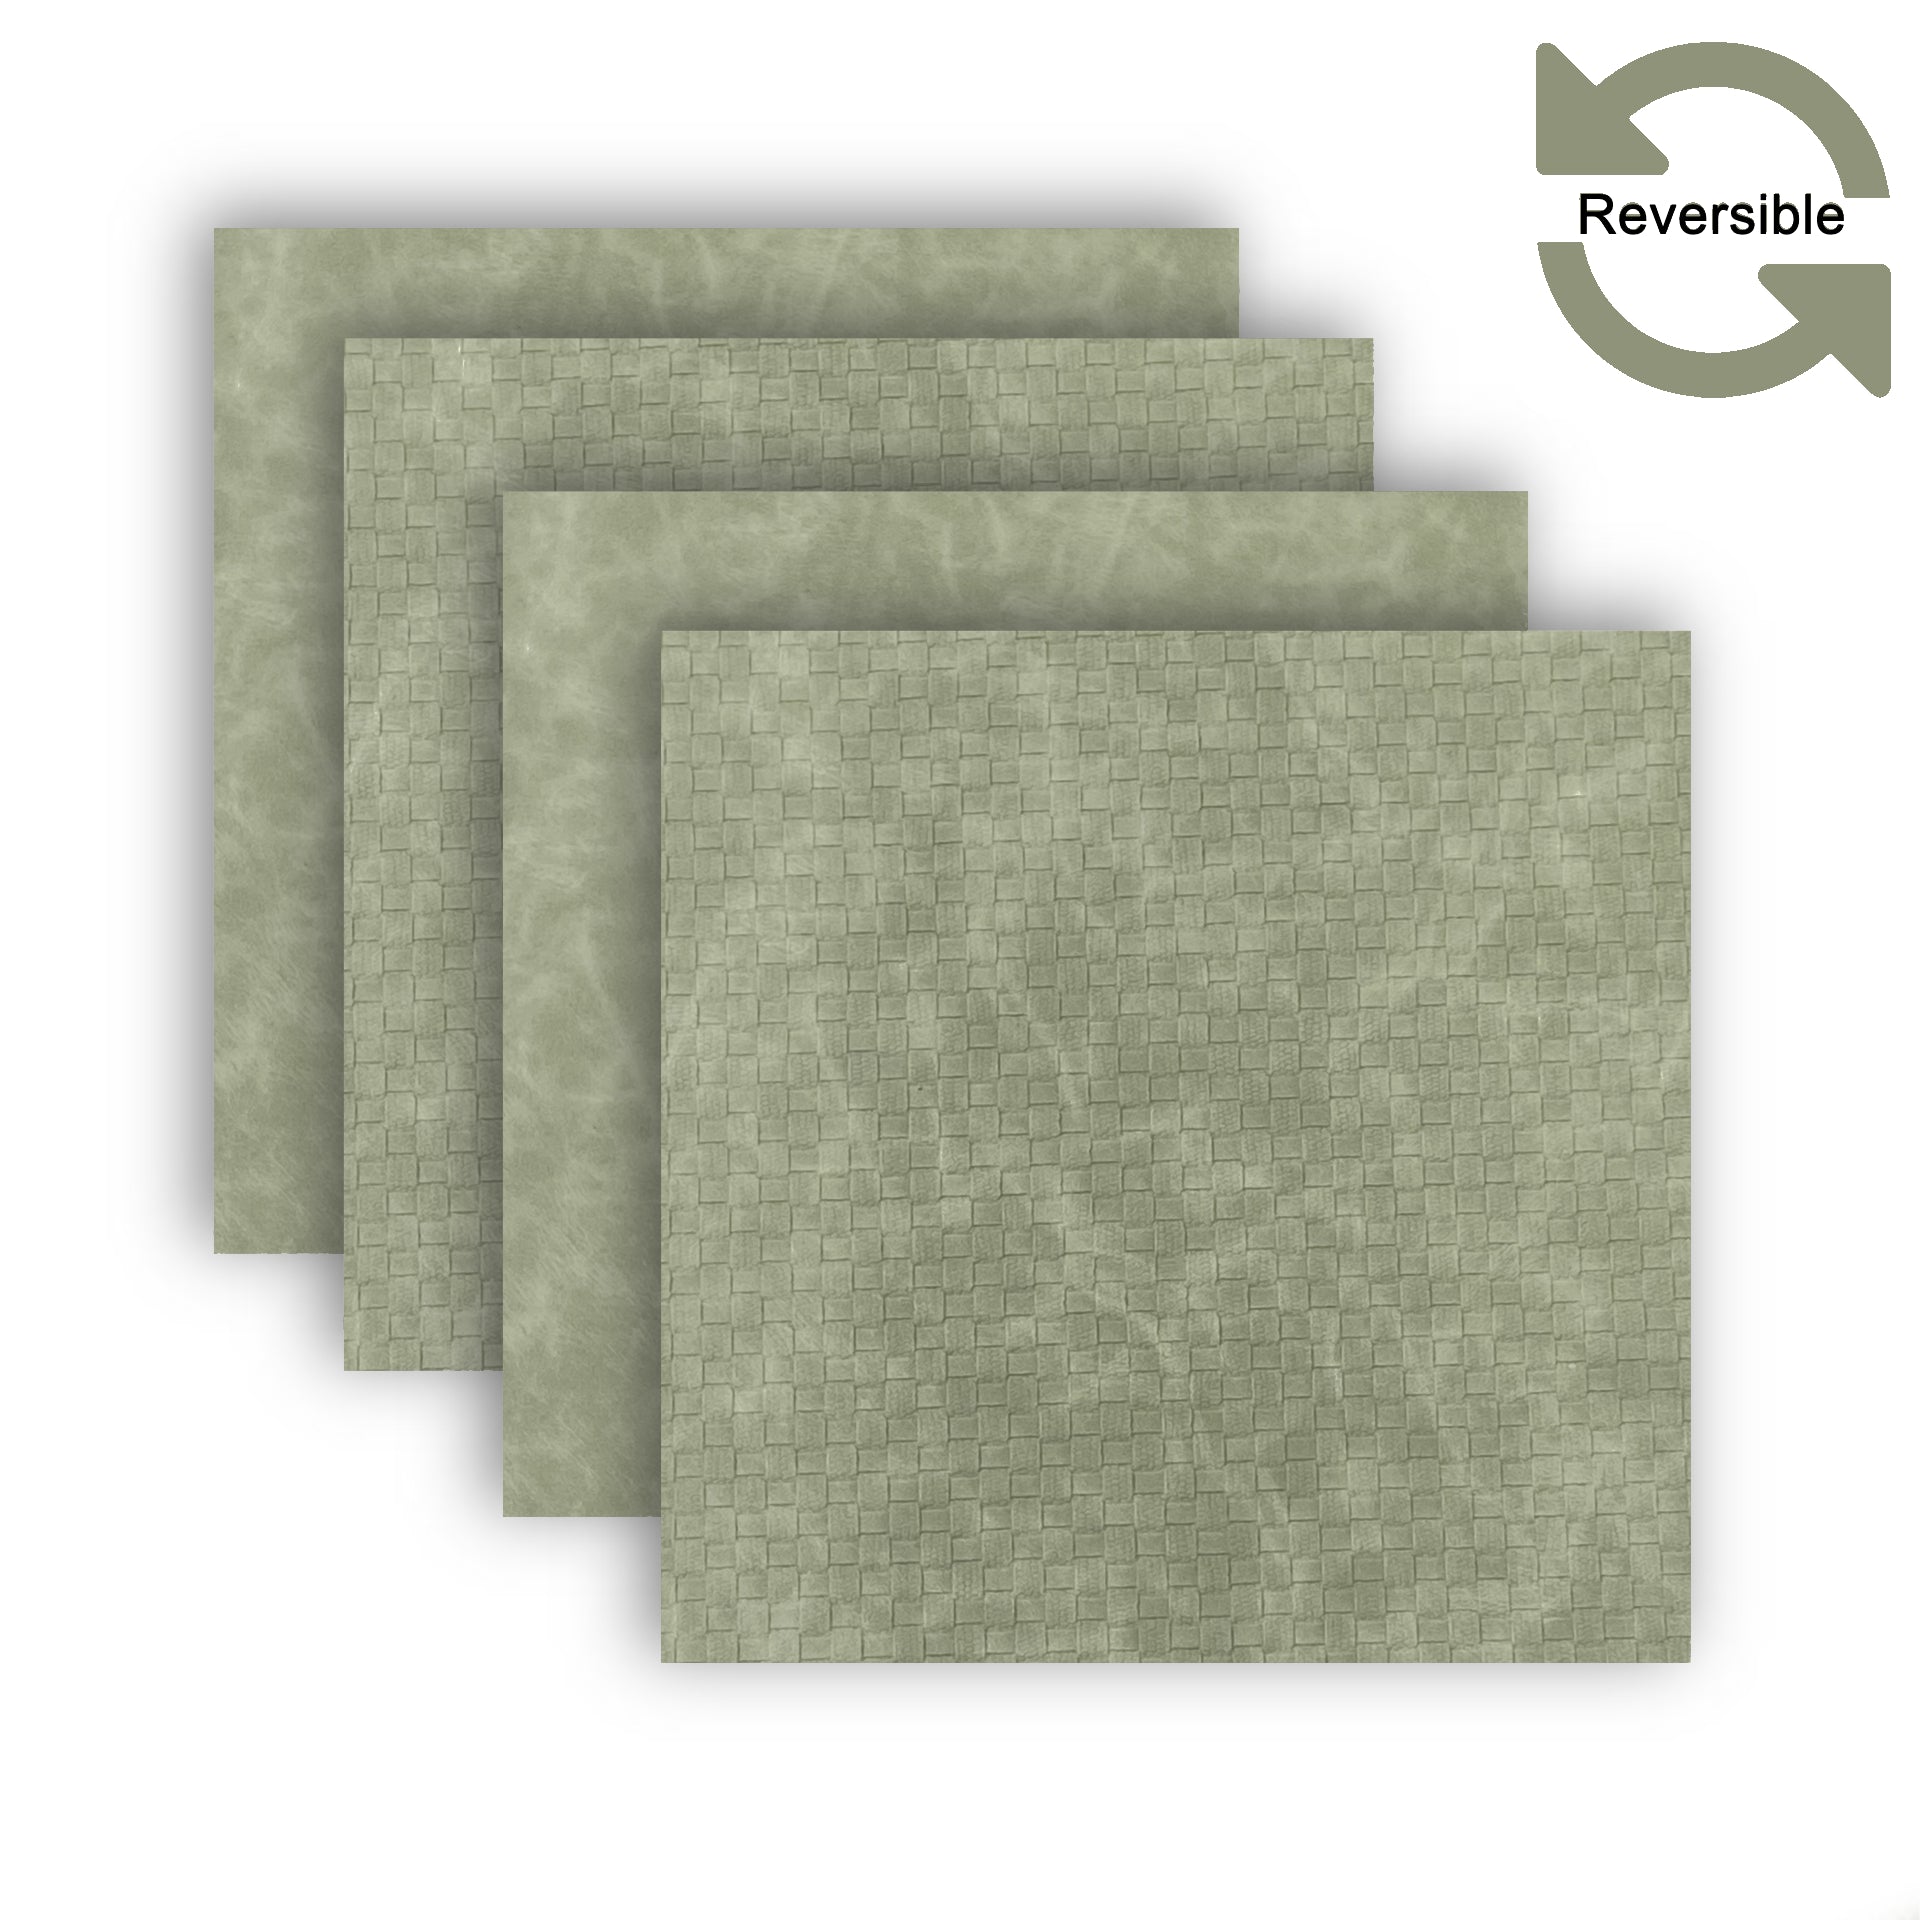 Dainty Home Sorento Faux Leather Reversible 2 Pattern 15" x 15" Square Placemat Set Of 4